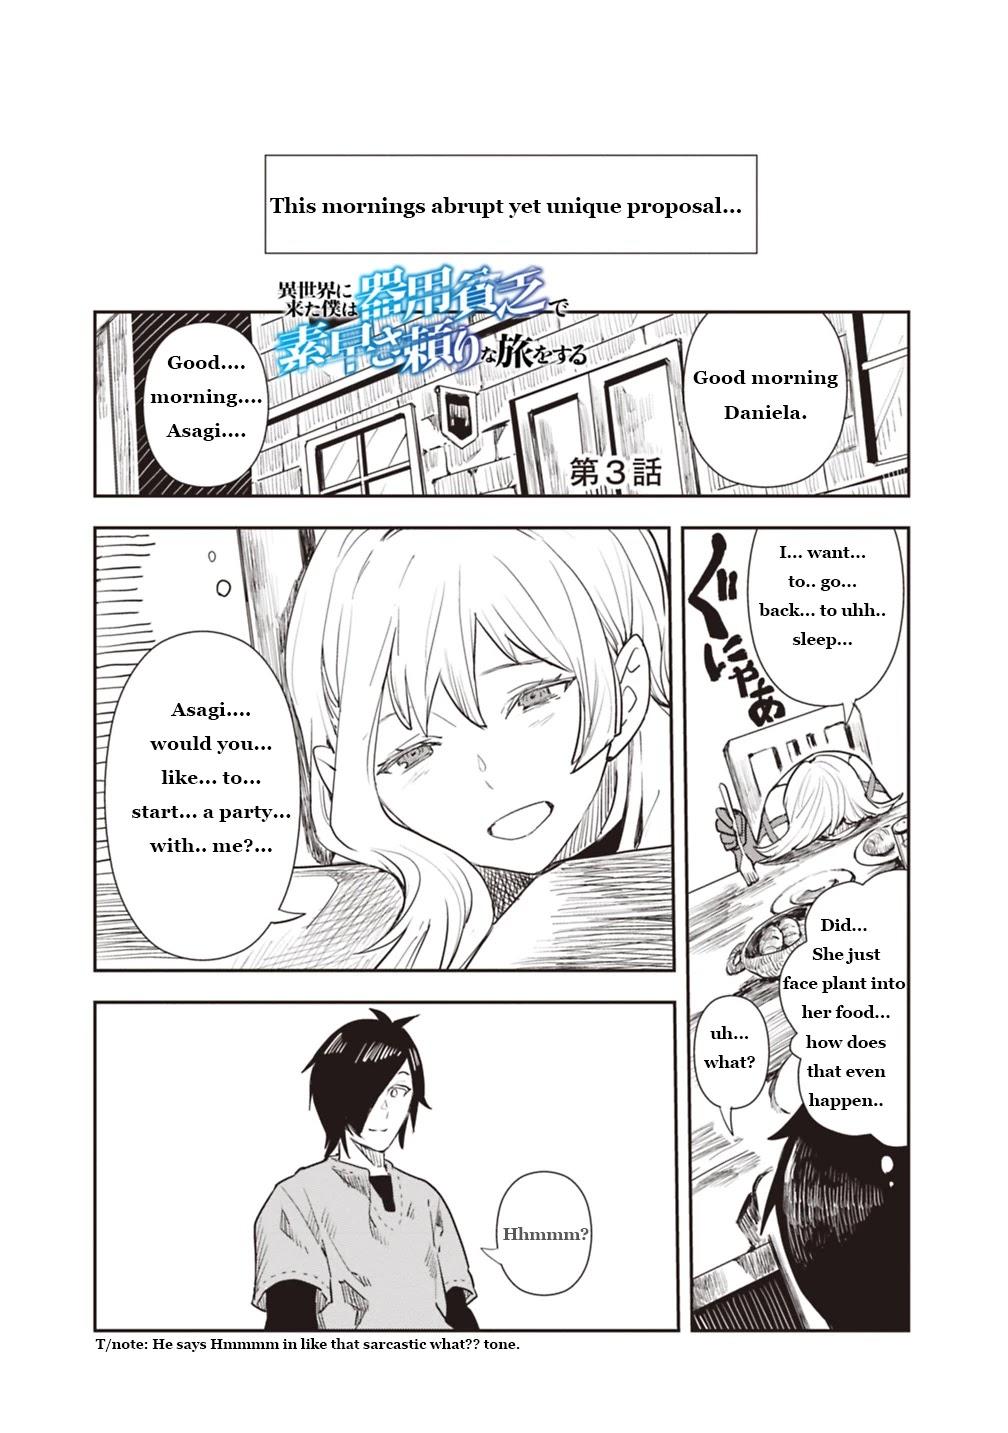 Jack Of All Trades Manga Read I Came To Another World As A Jack Of All Trades And A Master Of None  To Journey While Relying On Quickness Chapter 4 on Mangakakalot